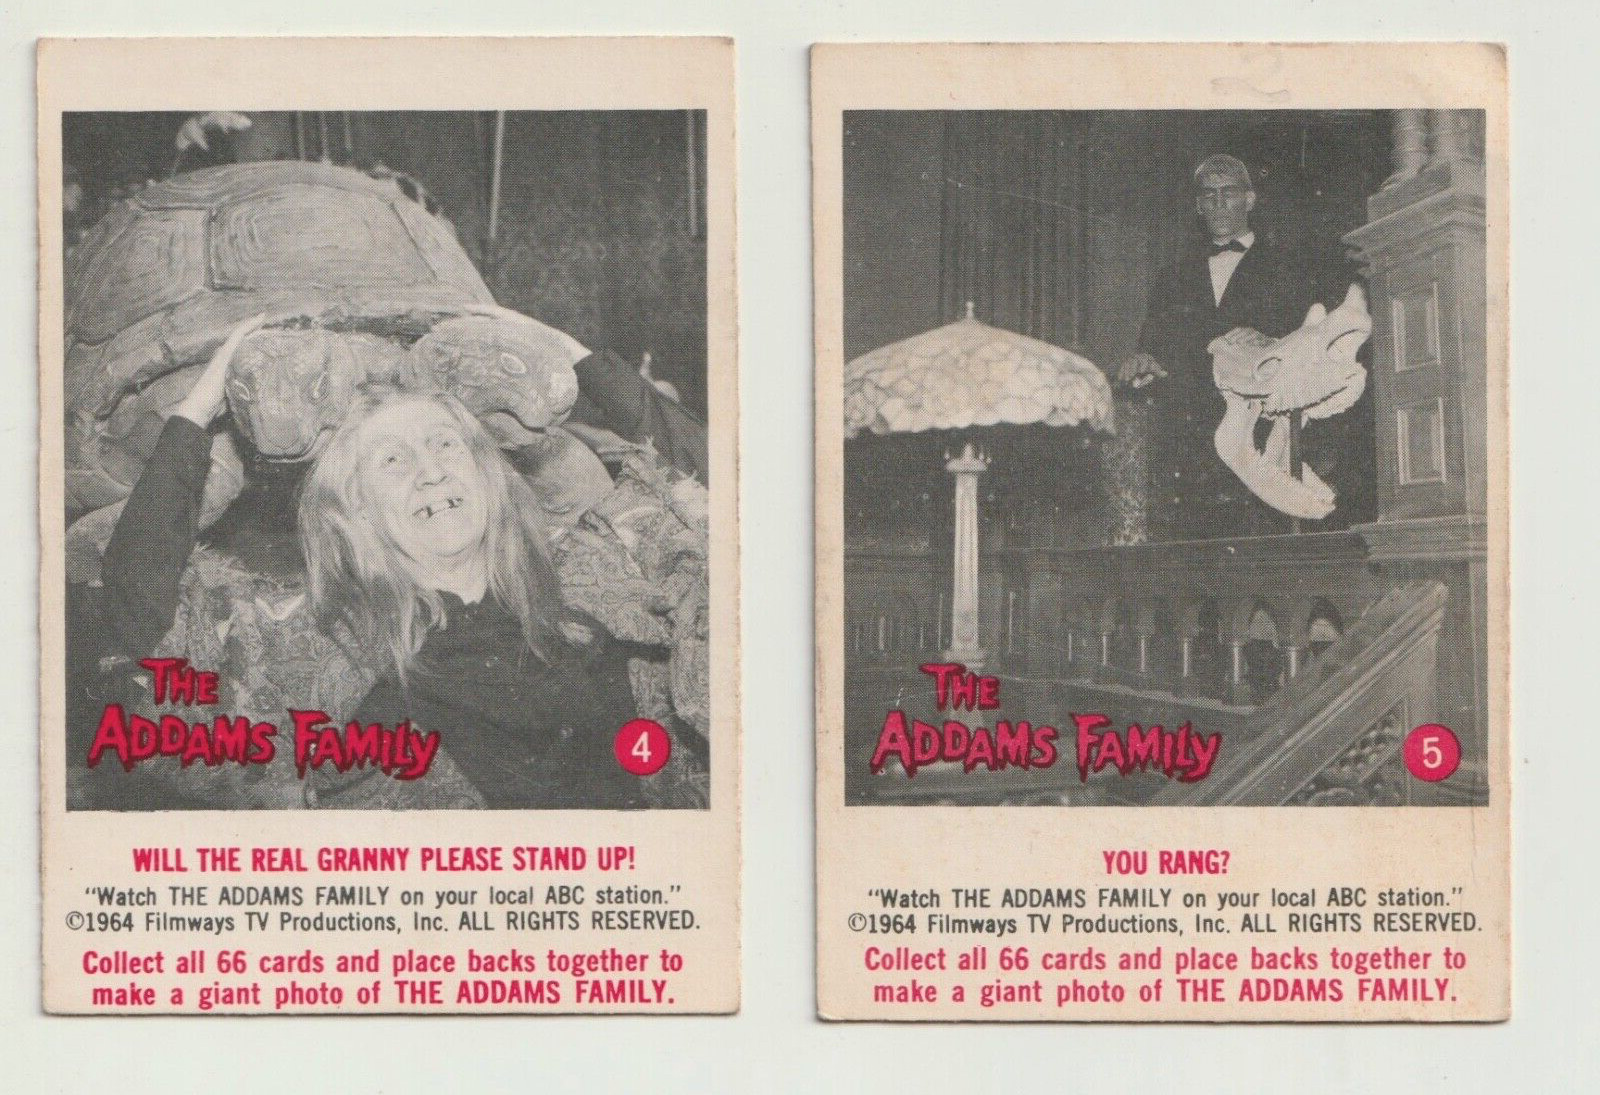 VINTAGE 1964 ADDAMS FAMILY TV SERIES SCANLENS DONRUSS TRADING CARDS 4 5 LURCH